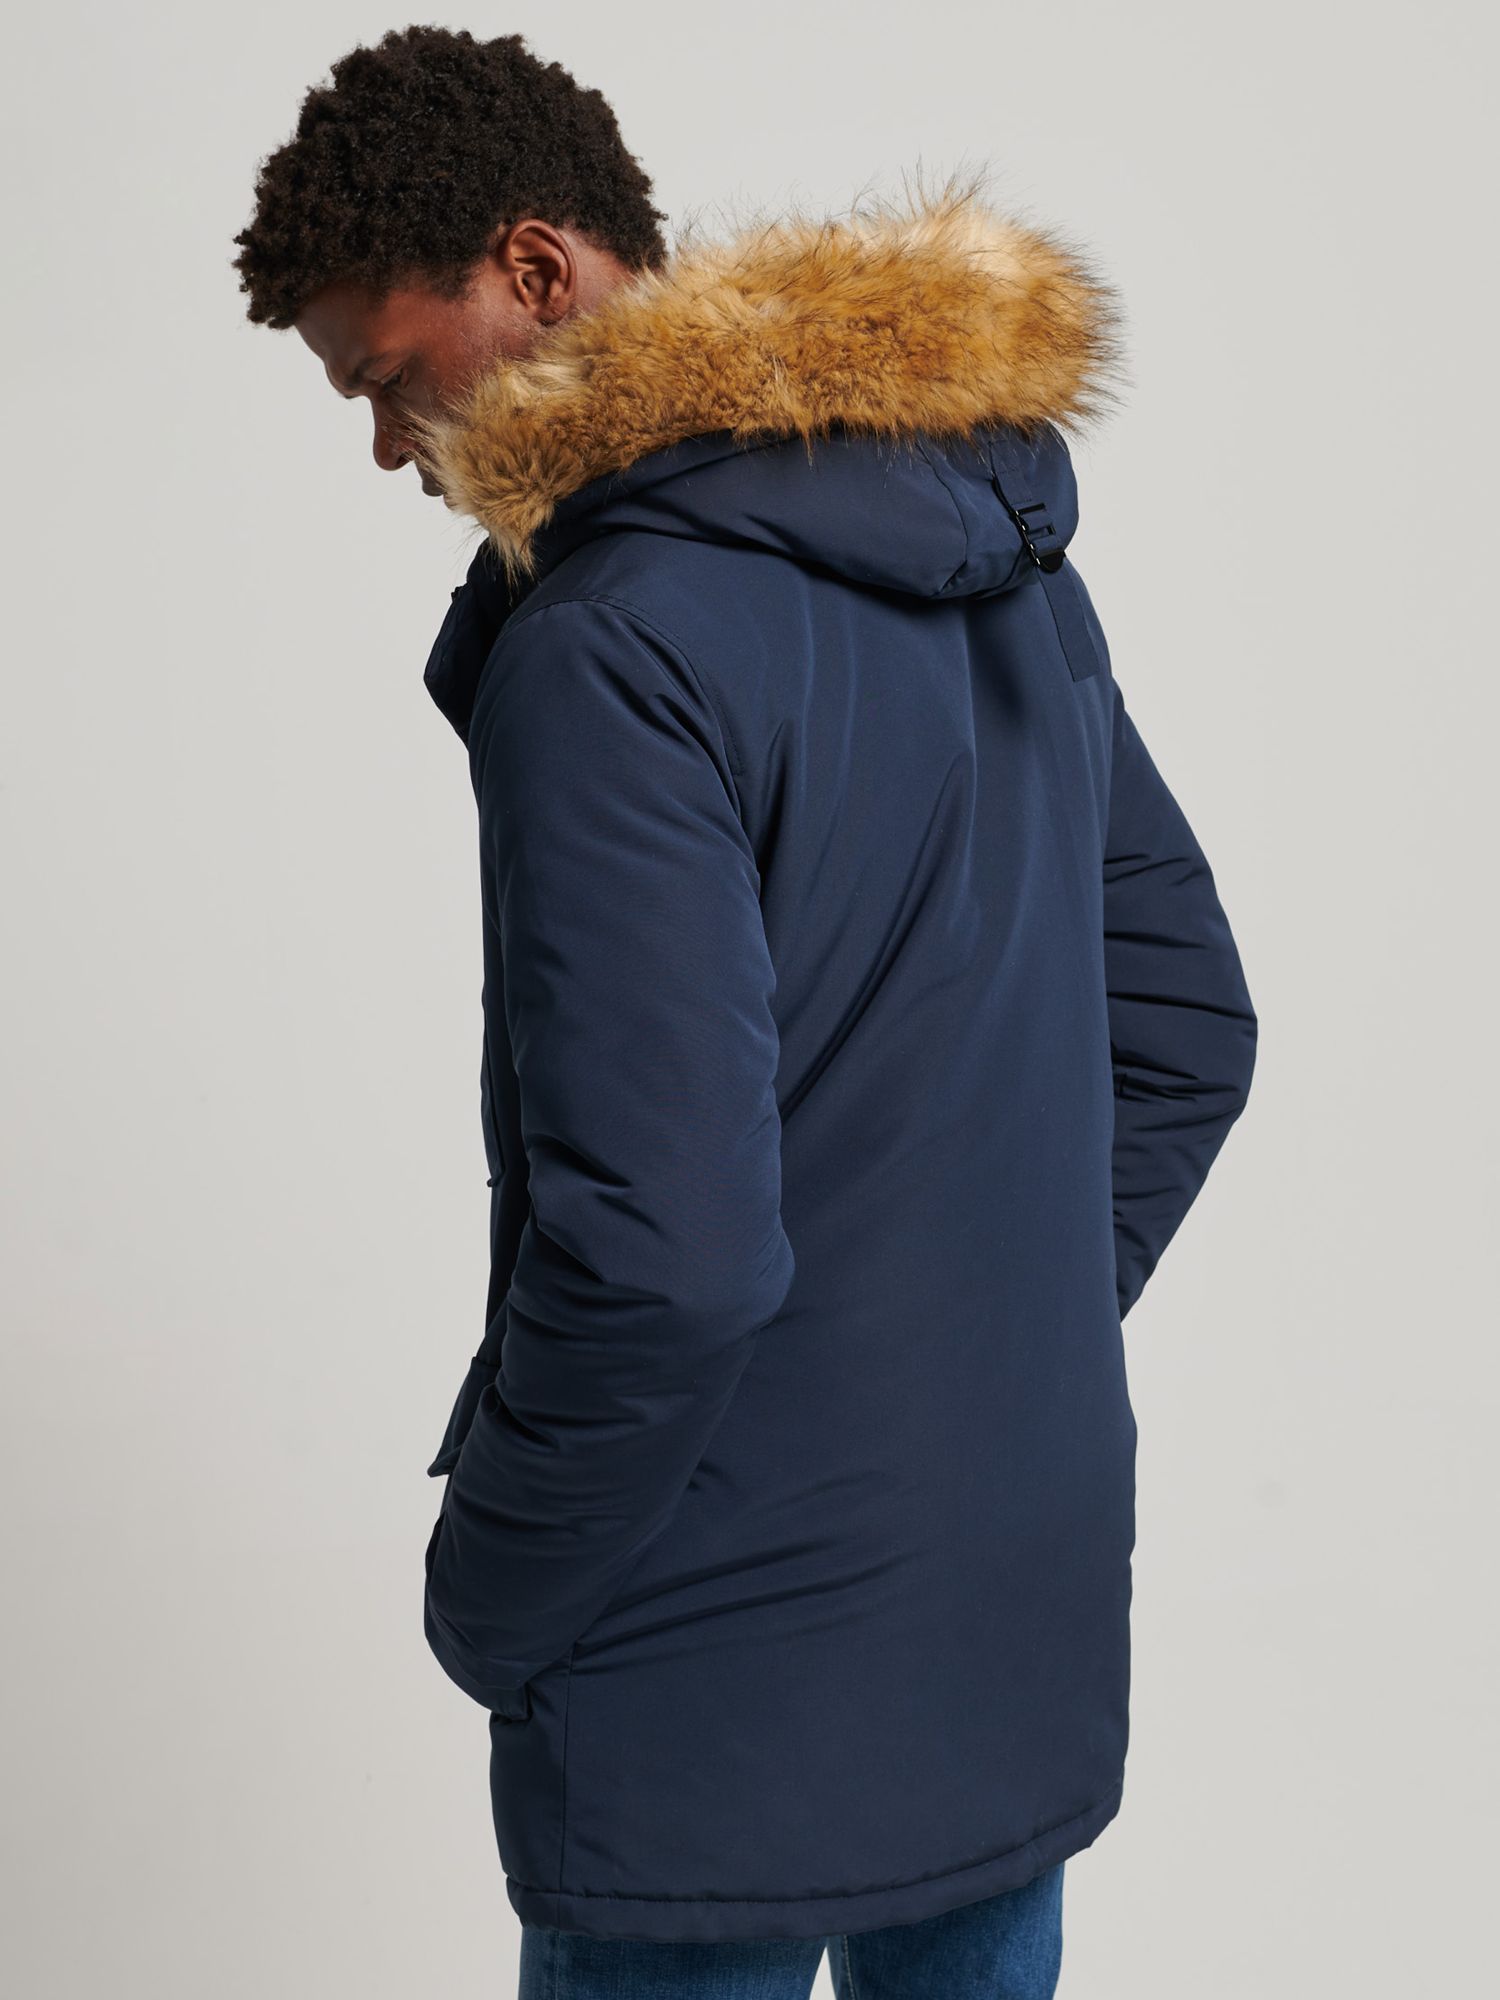 John Faux Chrome at Superdry Fur Partners Everest Hooded Nordic Parka, Navy & Lewis